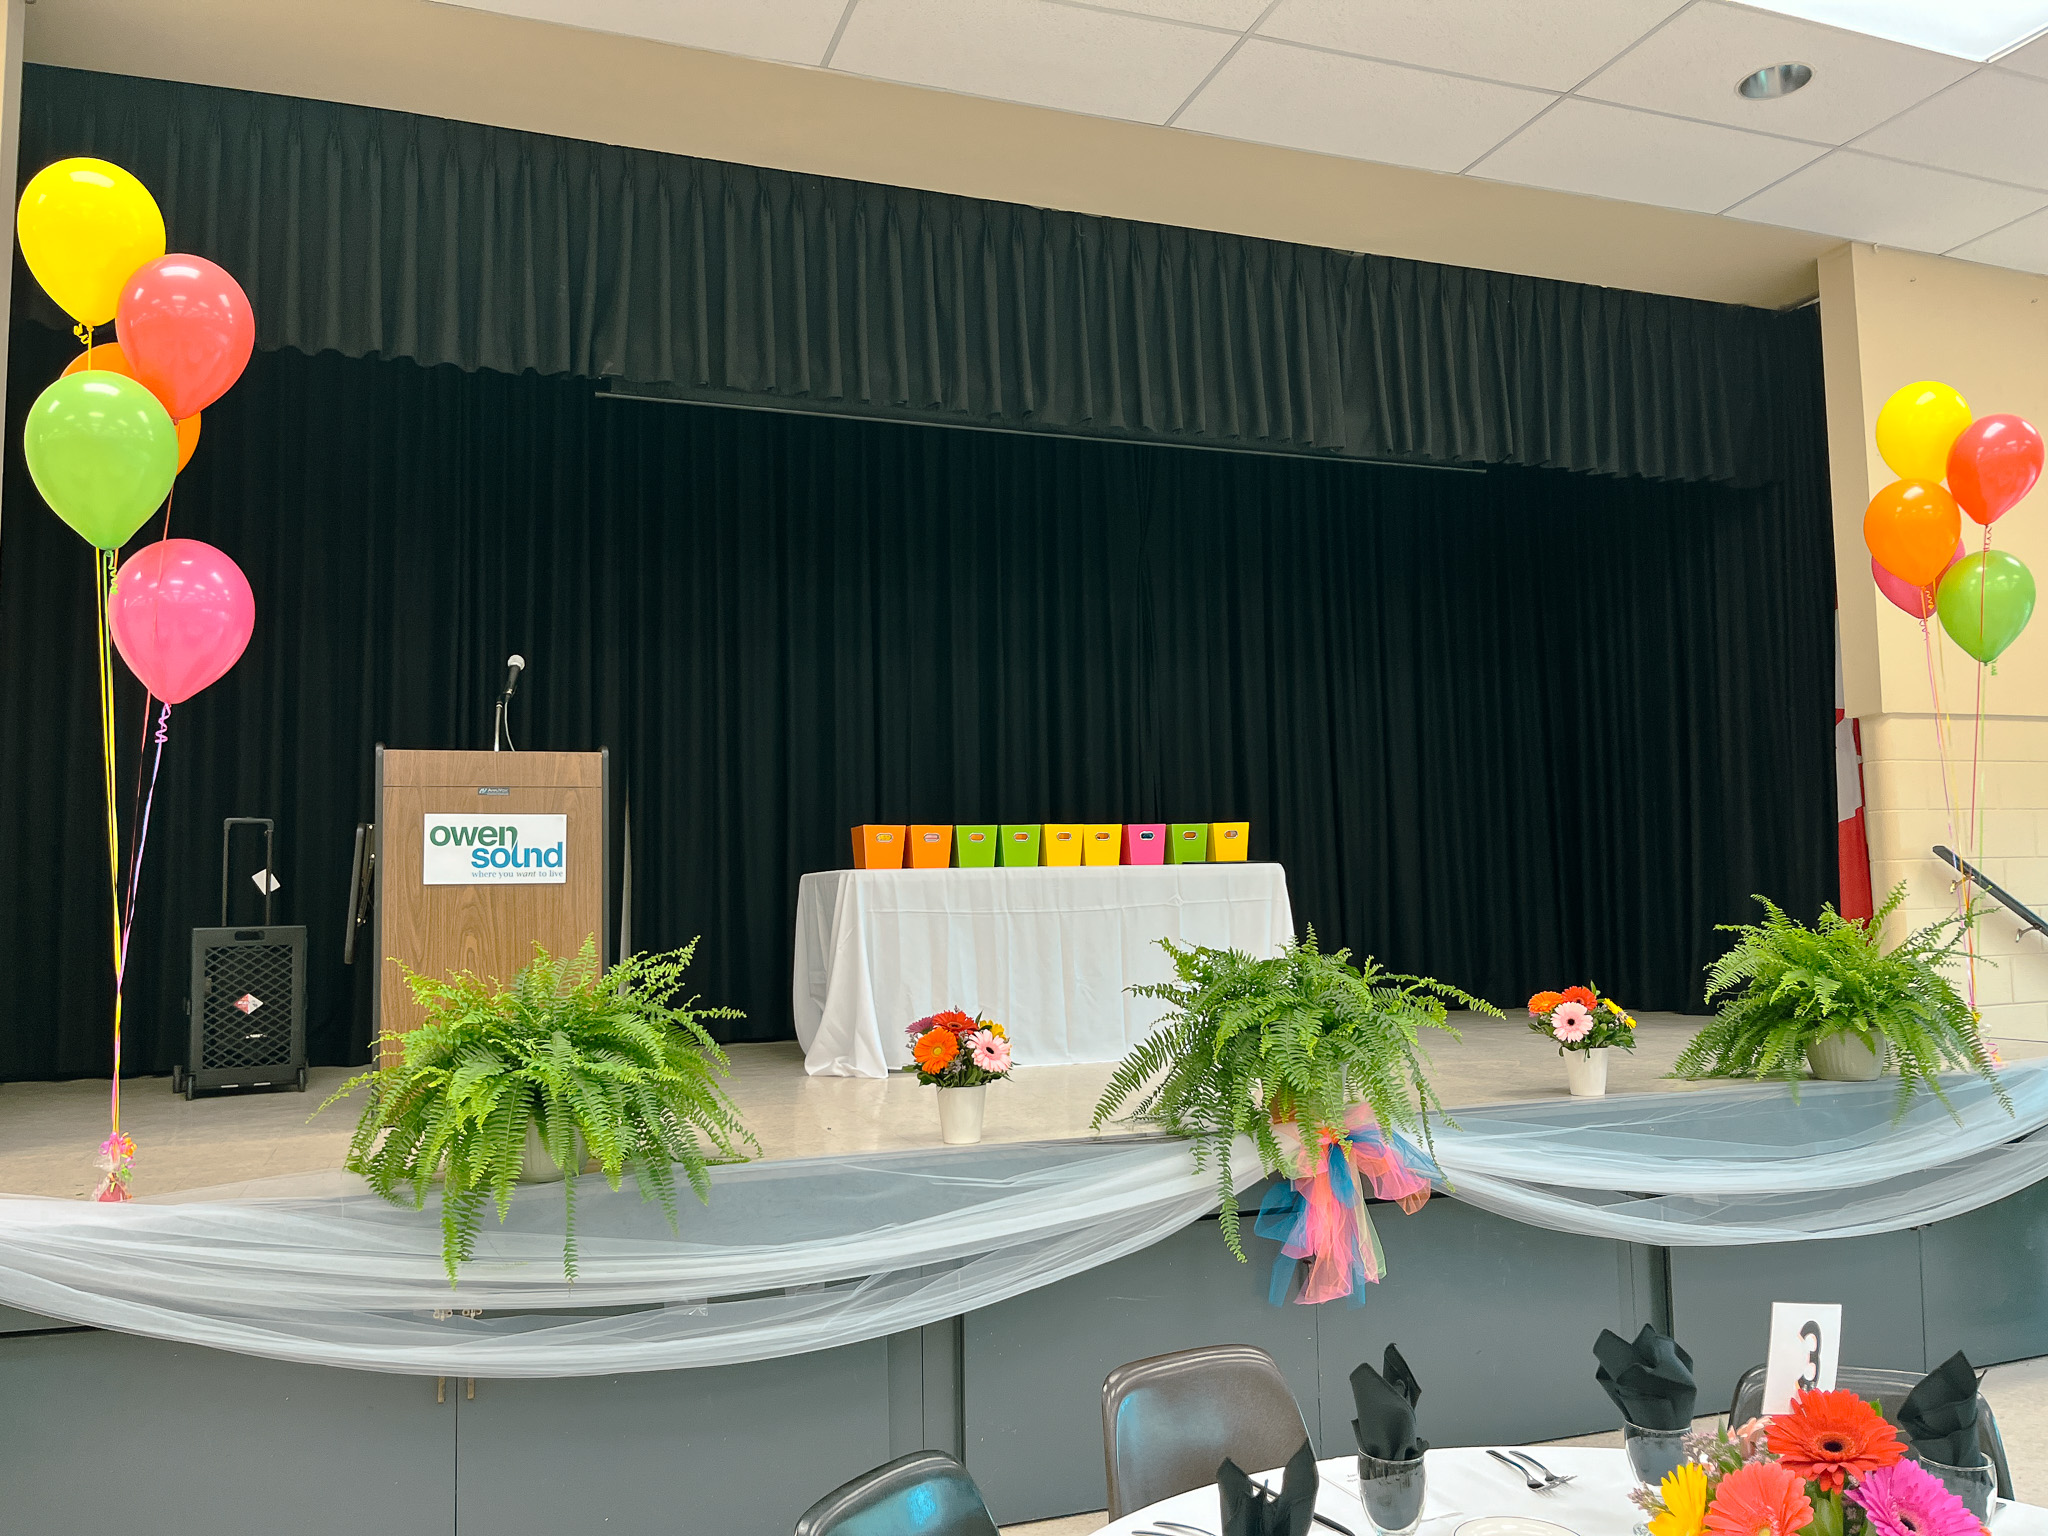 image of Banquet room set with tables chairs and balloons